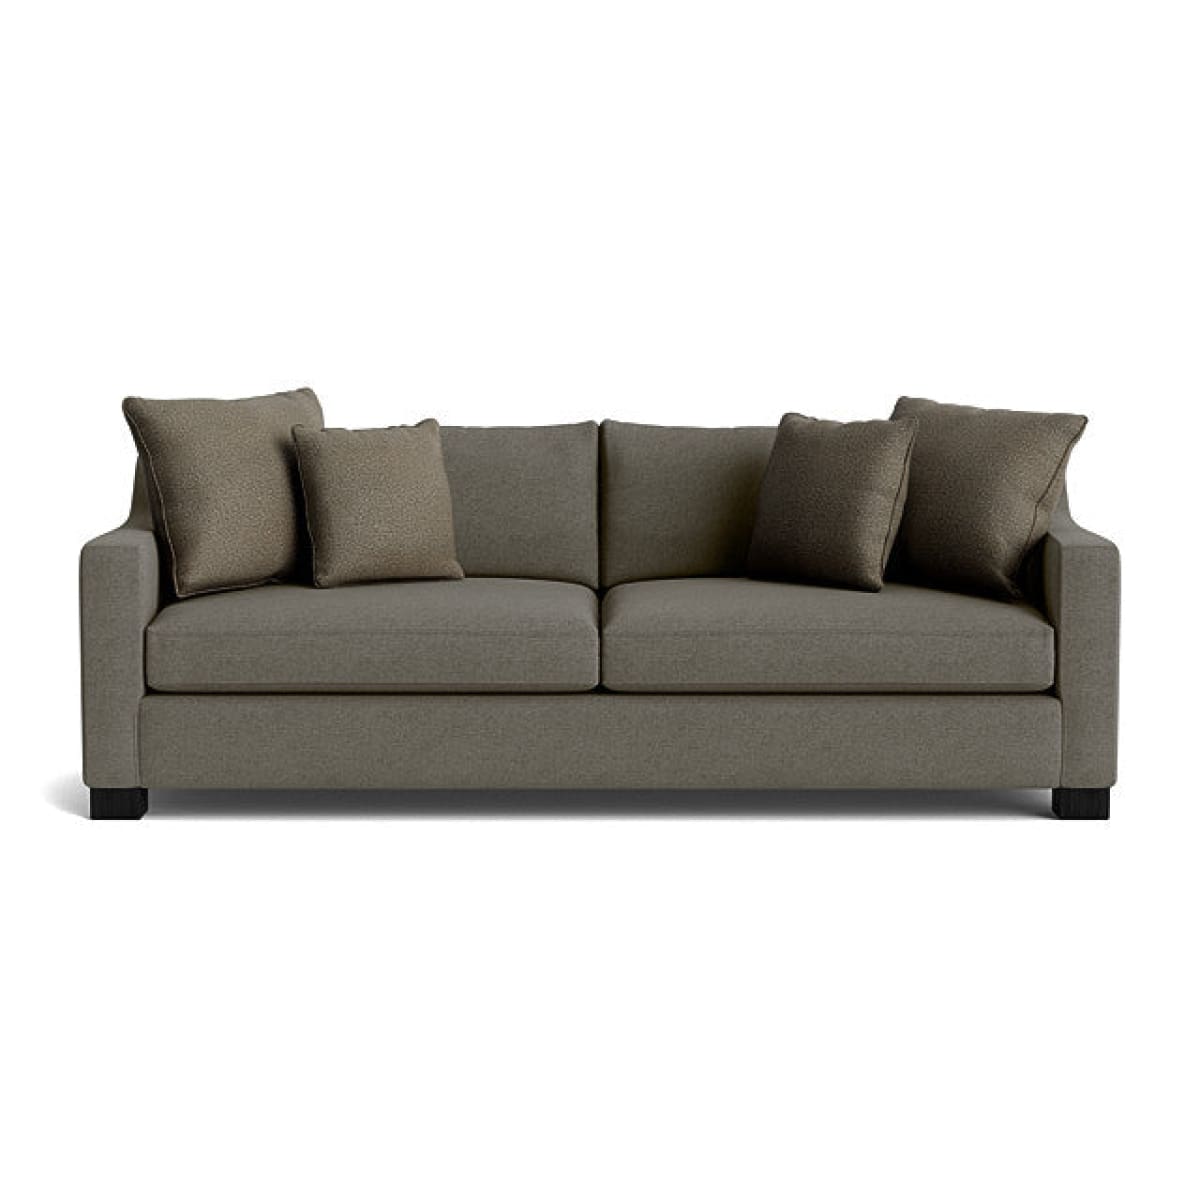 Ewing Sofa - Sectional - Entice Mist